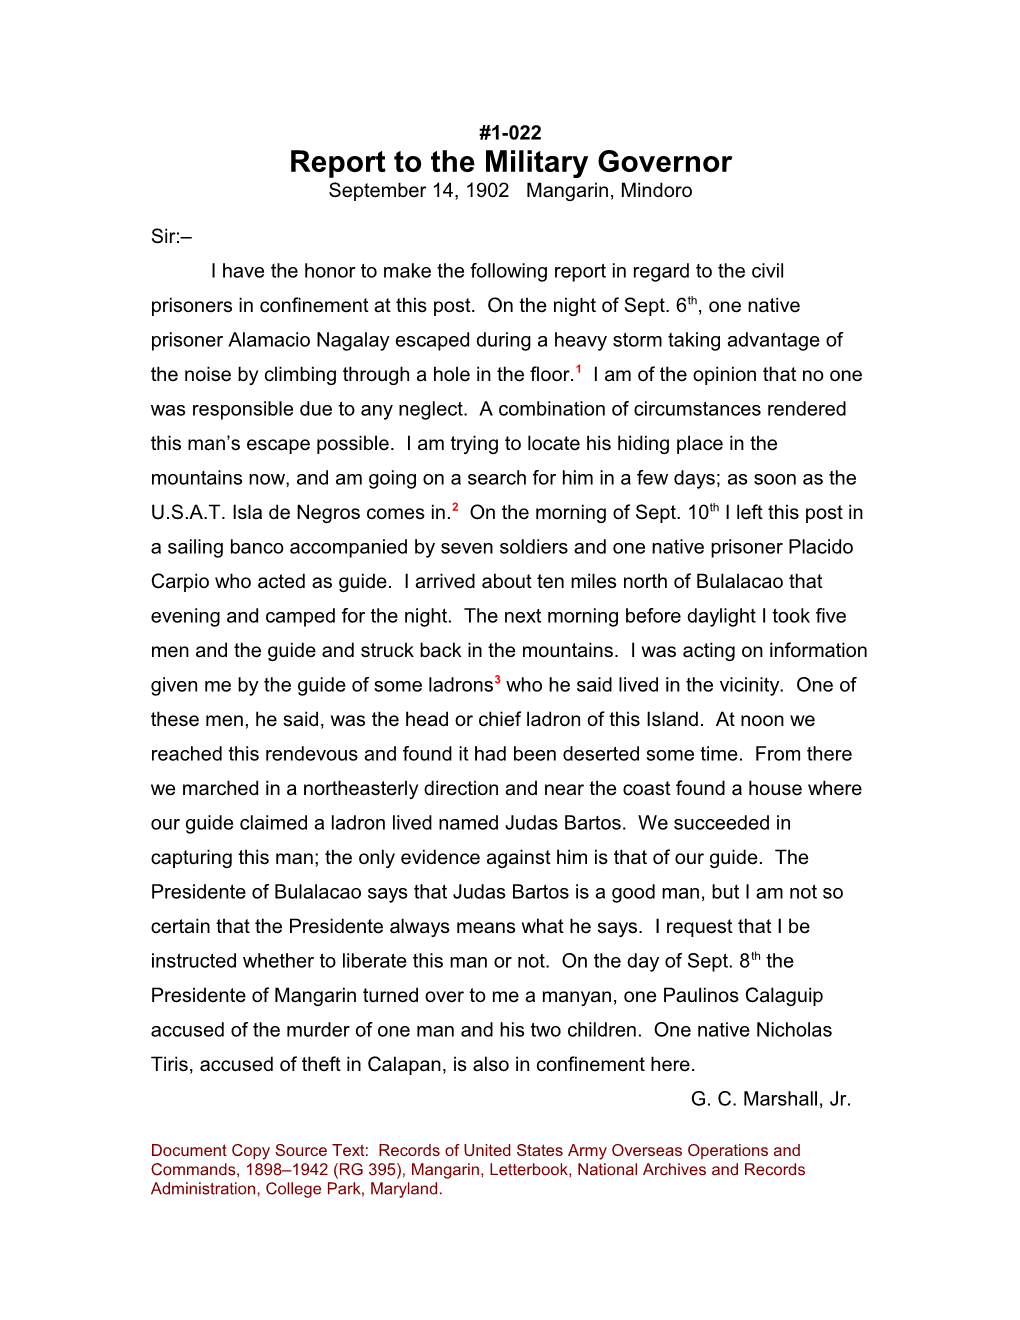 Report to the Military Governor